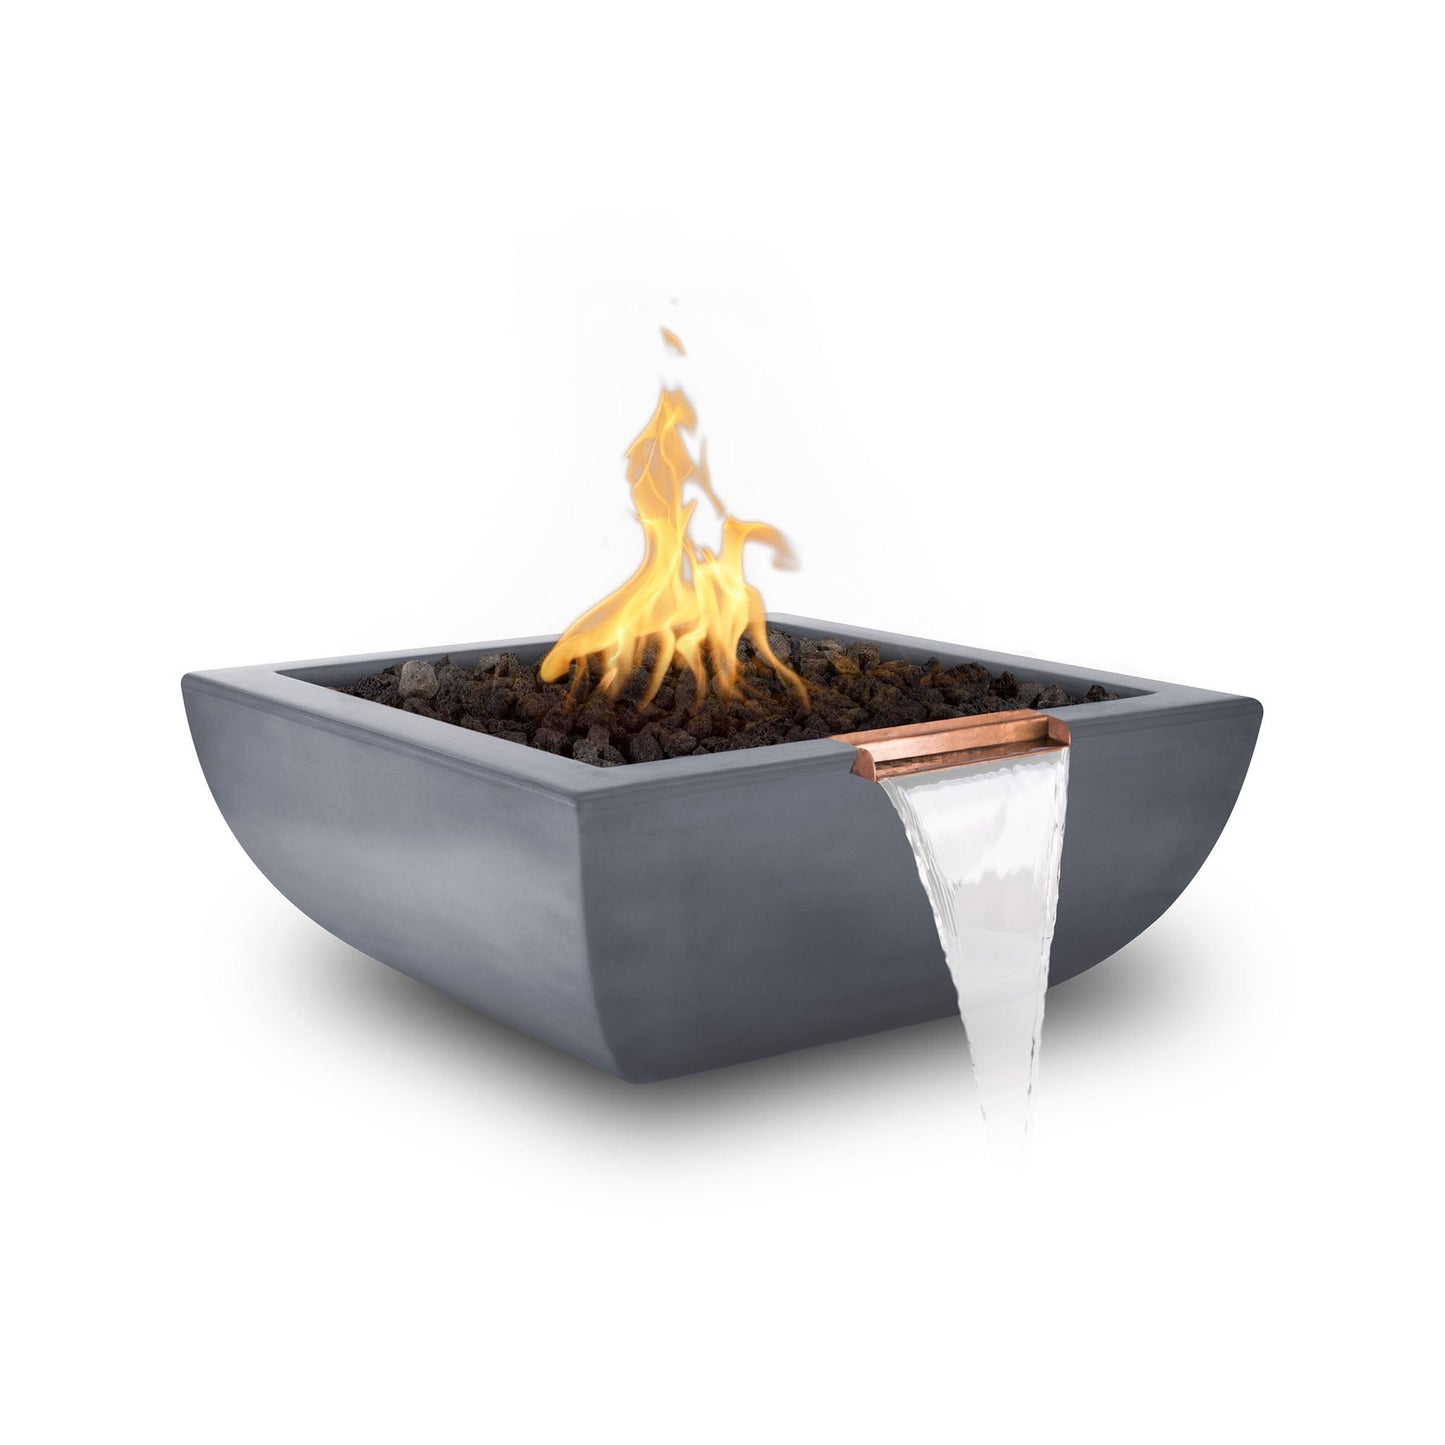 The Outdoor Plus Square Avalon 36" Rustic Coffee GFRC Concrete Natural Gas Fire & Water Bowl with Match Lit with Flame Sense Ignition